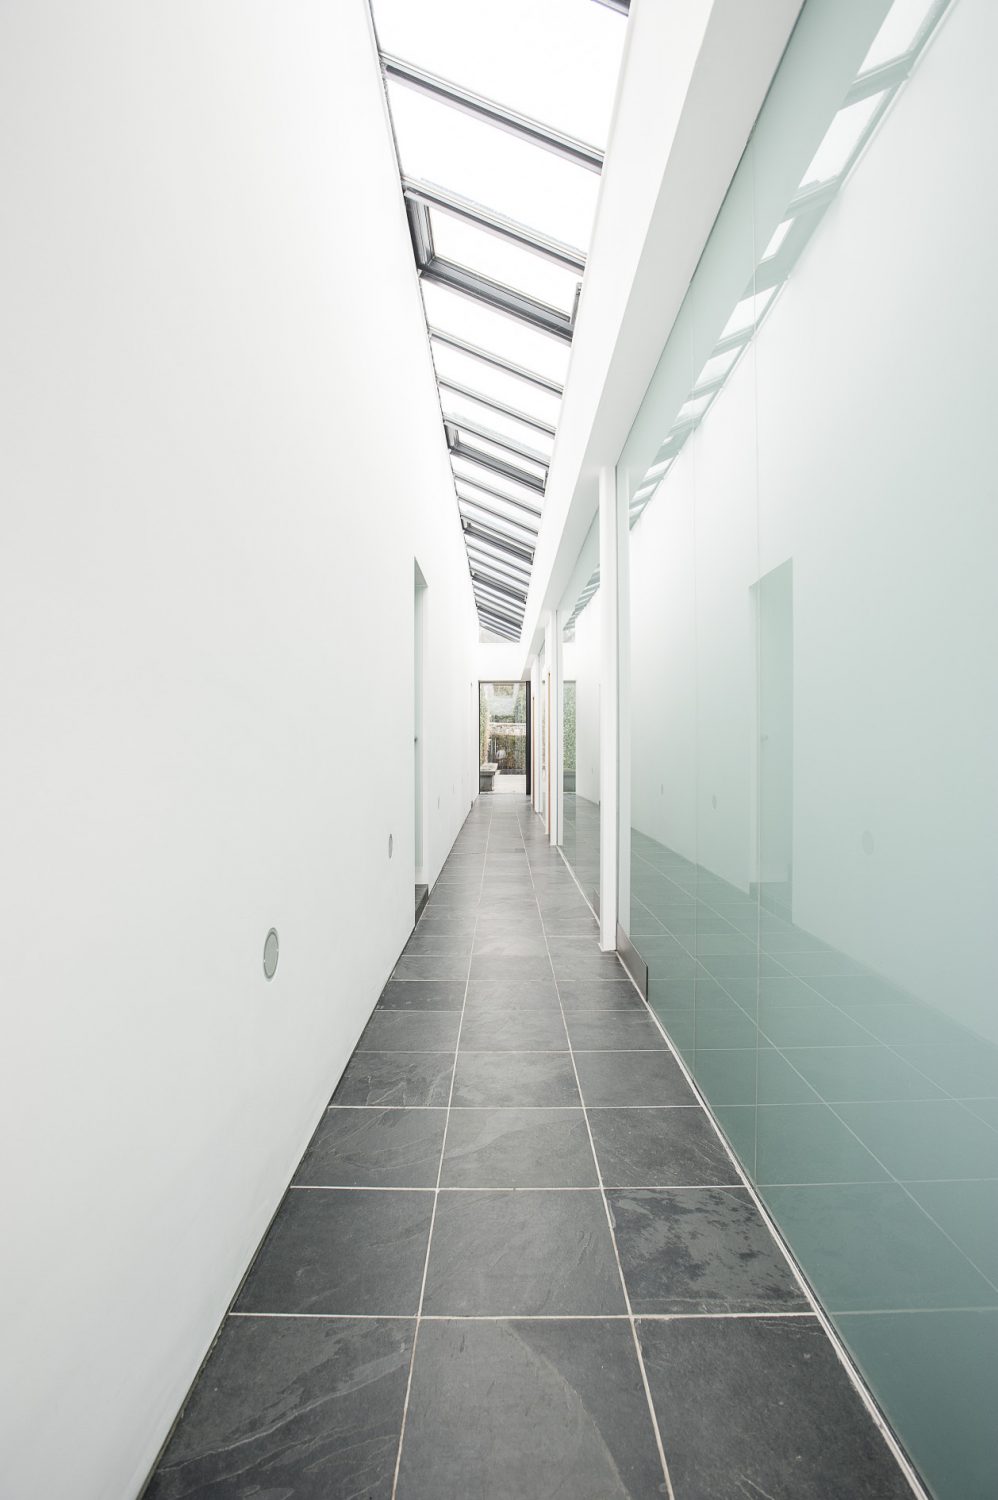 A glazed passageway acts as the spine of the building and separates the contemporary glass part of the building from the original potting sheds